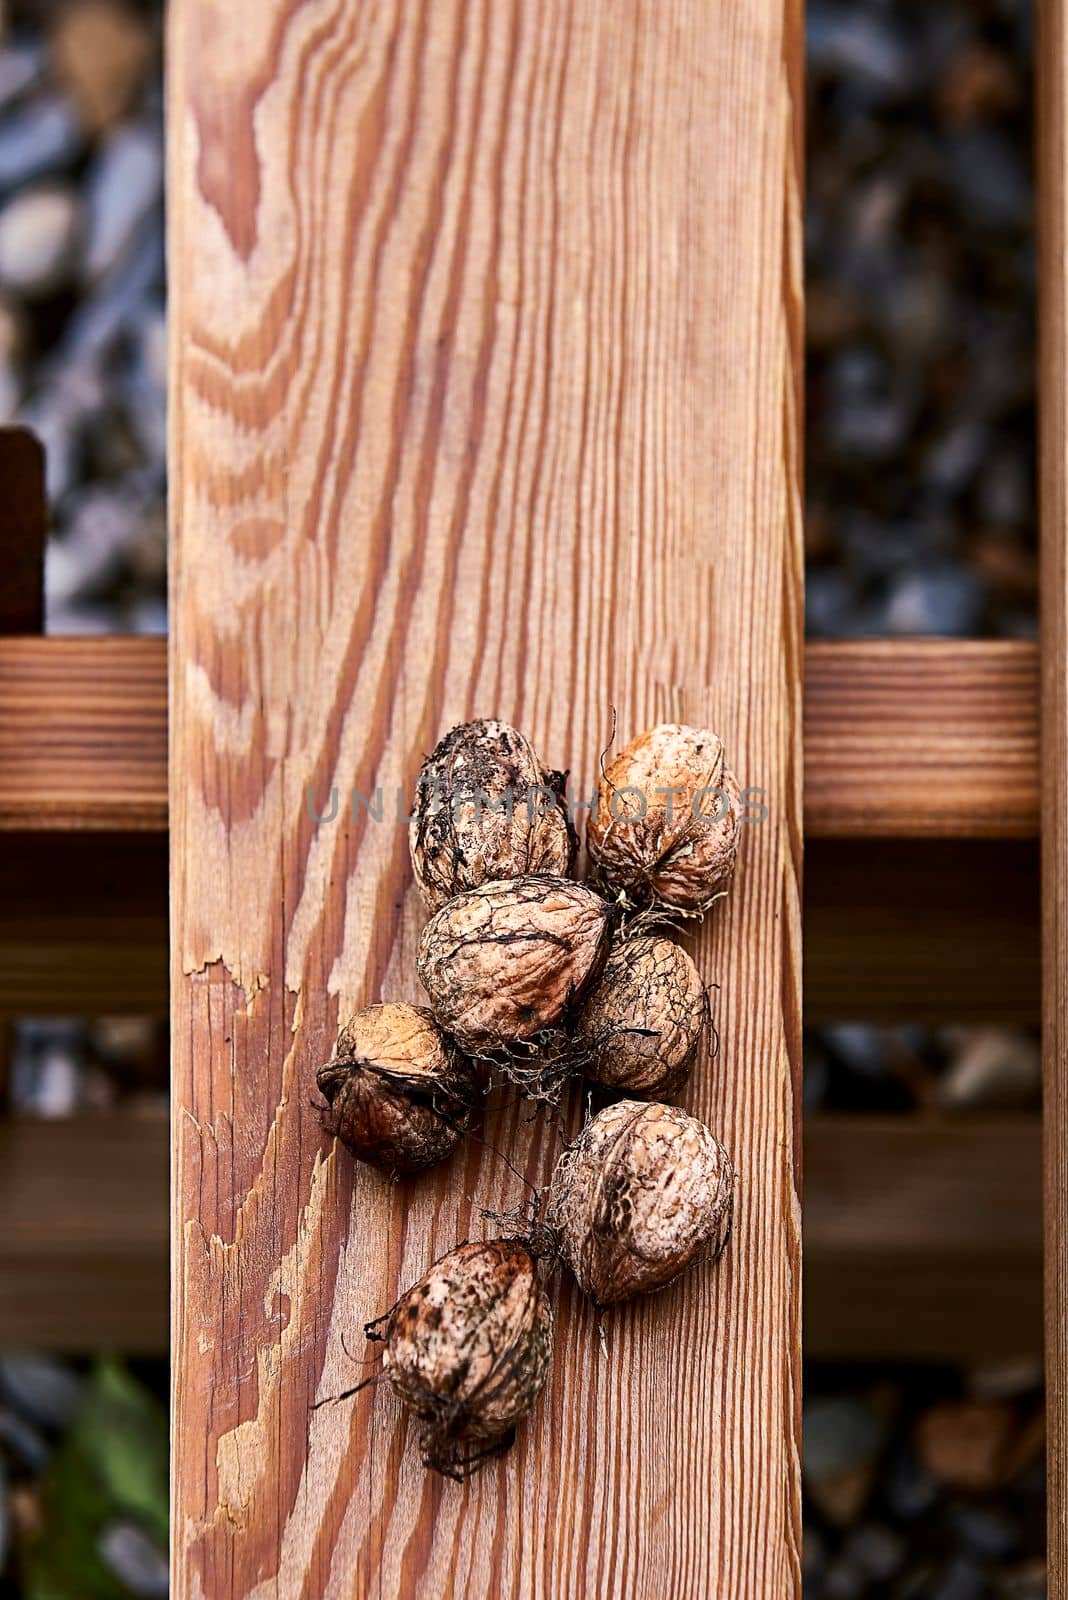 Group of in-shell walnuts stacked on wooden board.Empty space, out-of-focus background, biological dirt, brown lines, parallels